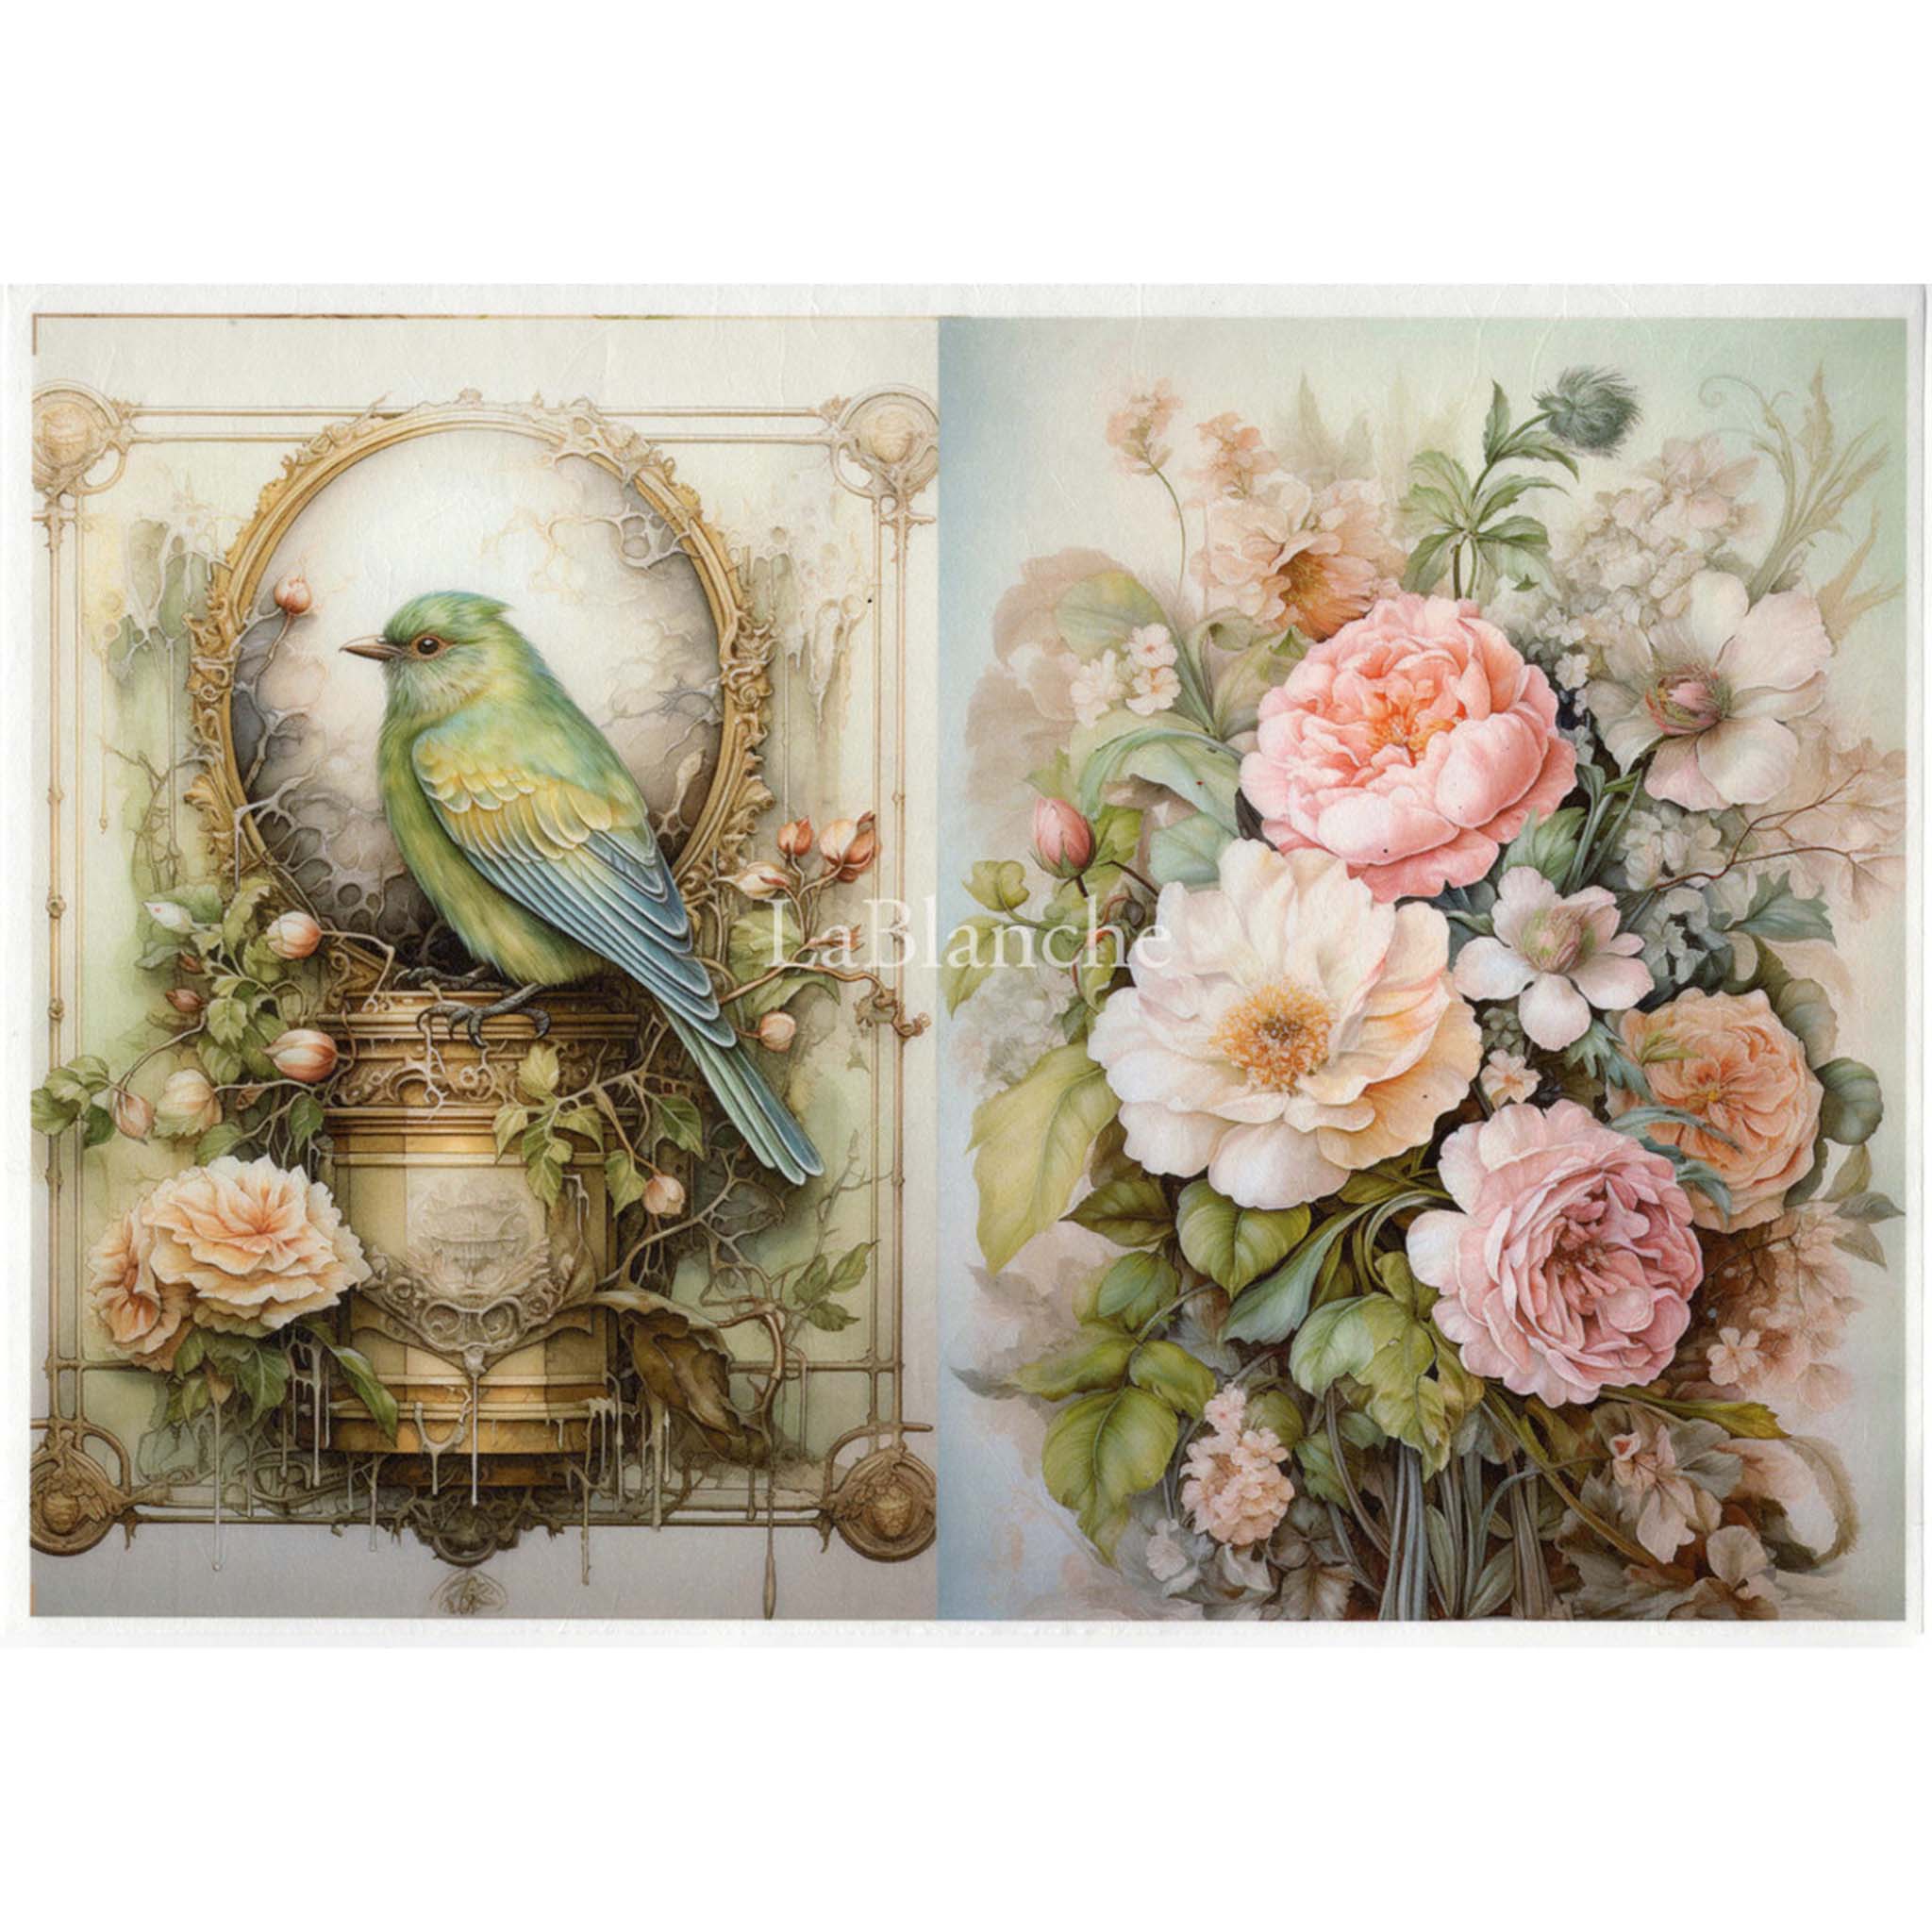 A4 rice paper featuring a delightful blue bird perched on an ornate frame on one side, and a stunning bouquet on the other.  White borders are on the top and bottom.